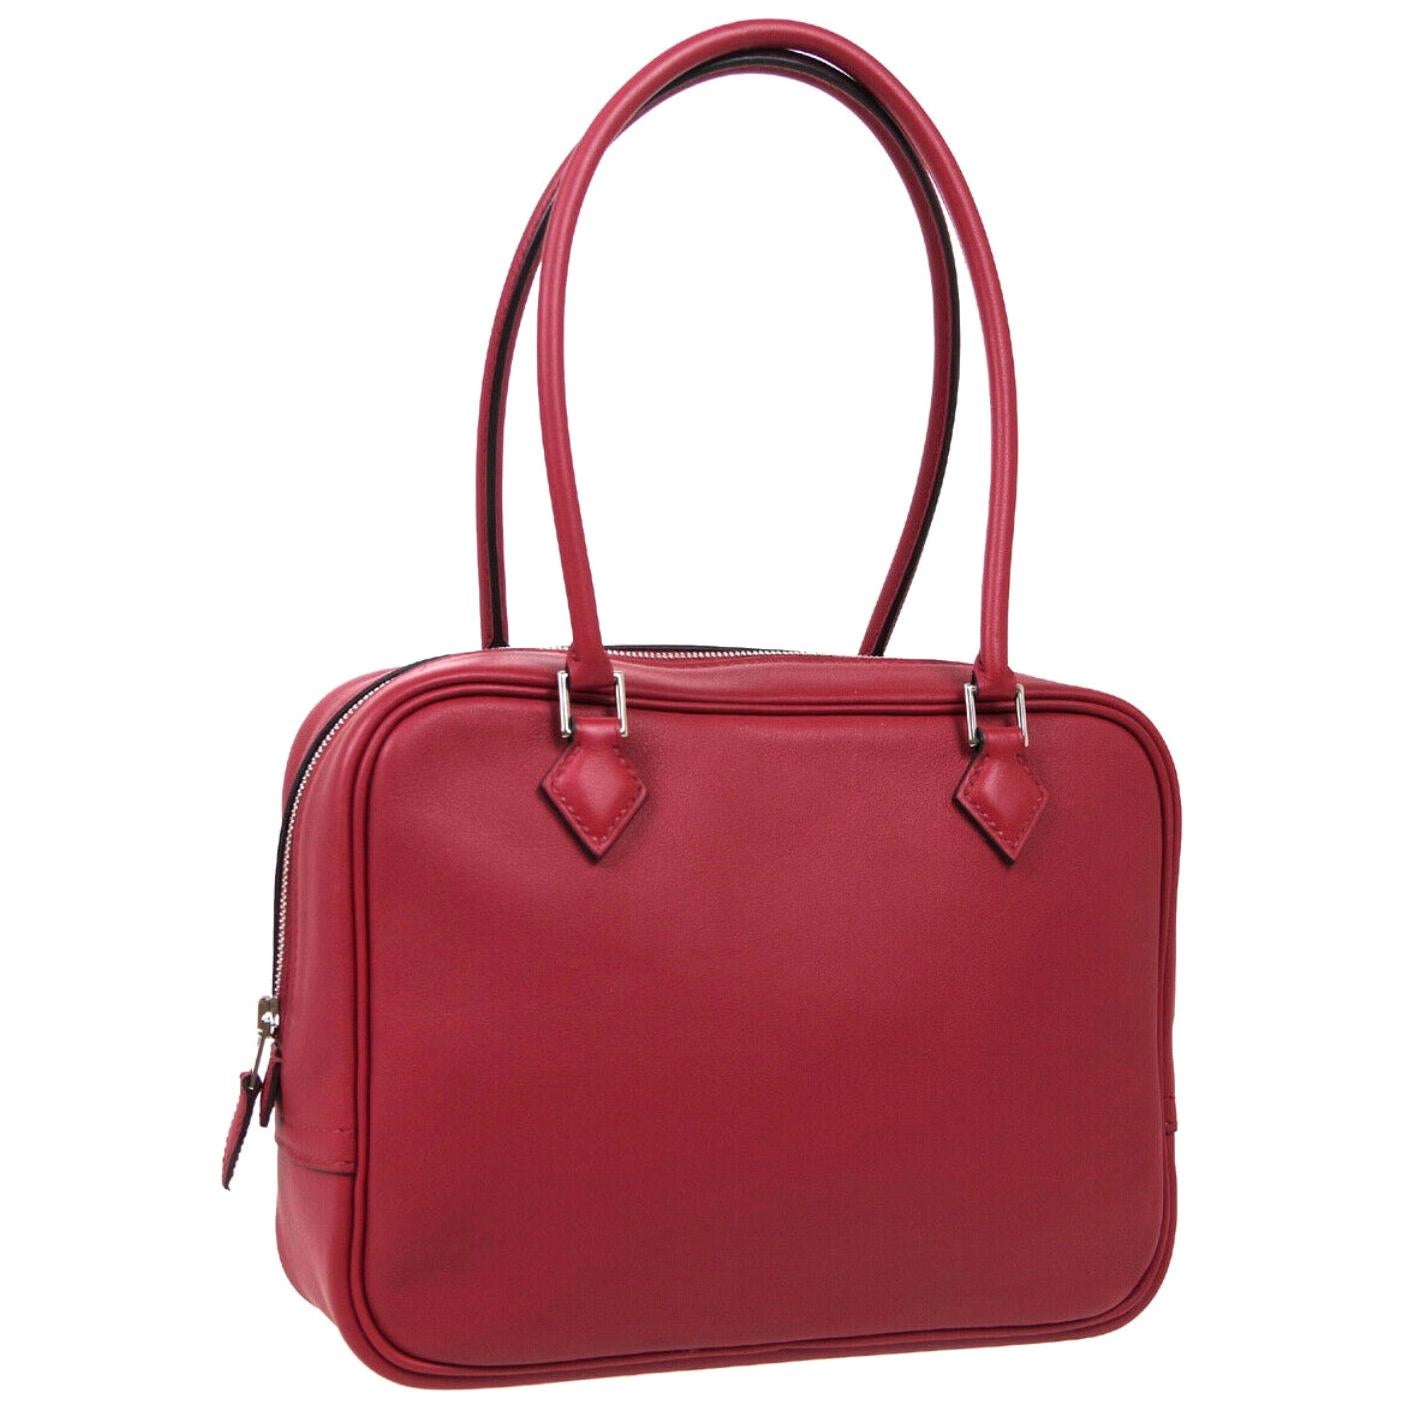 Hermes Red Leather Small Silver Evening Top Handle Satchel Bag